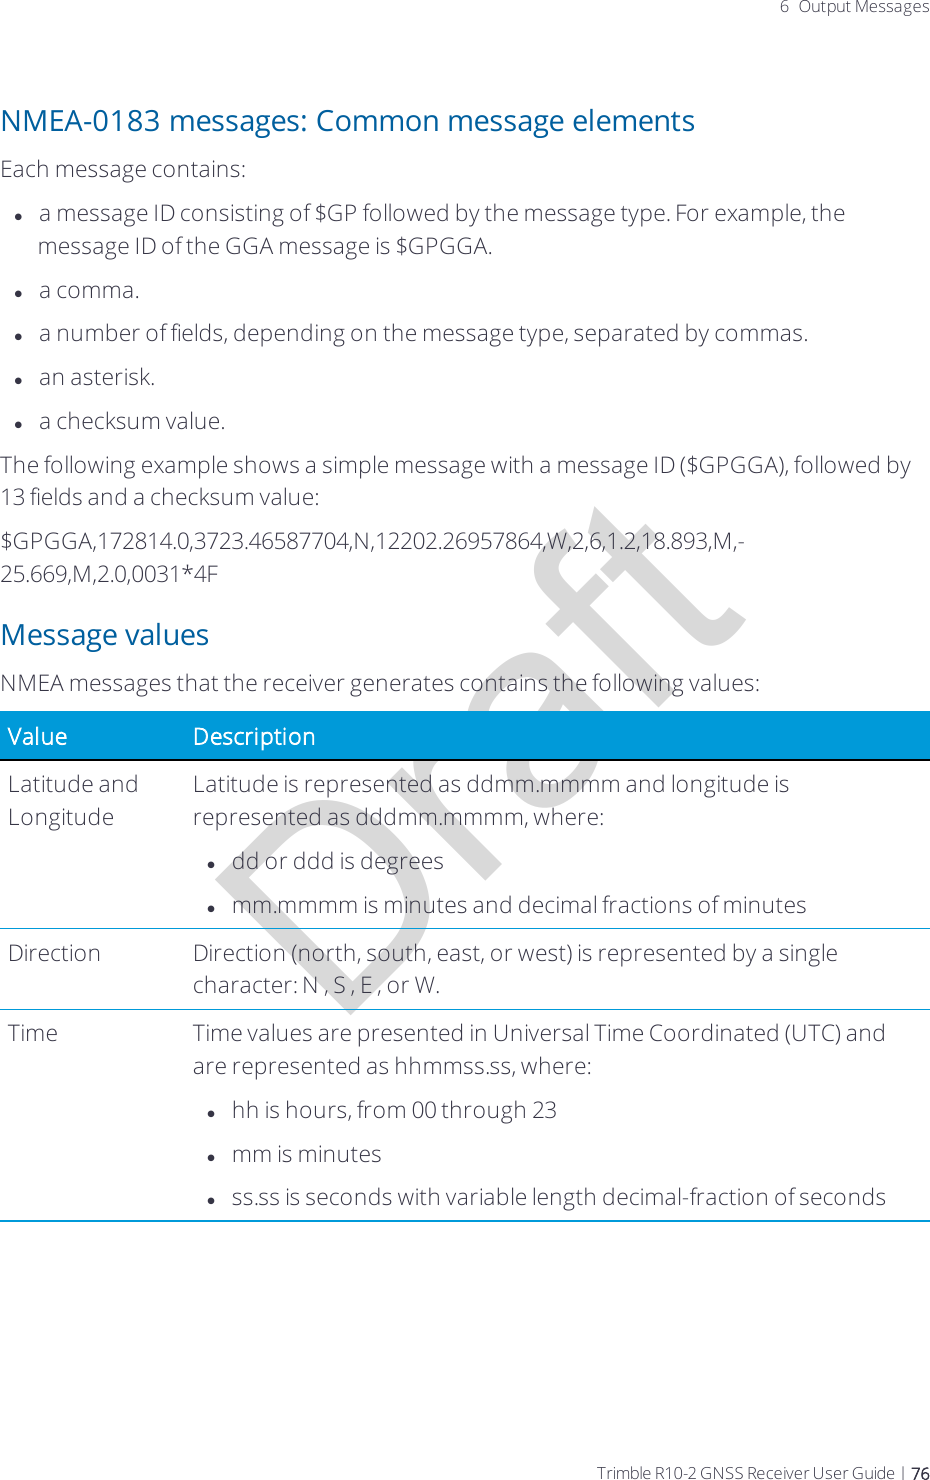 Draft6 Output MessagesNMEA-0183 messages: Common message elementsEach message contains:la message ID consisting of $GP followed by the message type. For example, the message ID of the GGA message is $GPGGA.la comma.la number of fields, depending on the message type, separated by commas.lan asterisk.la checksum value.The following example shows a simple message with a message ID ($GPGGA), followed by 13 fields and a checksum value:$GPGGA,172814.0,3723.46587704,N,12202.26957864,W,2,6,1.2,18.893,M,-25.669,M,2.0,0031*4FMessage valuesNMEA messages that the receiver generates contains the following values:Value DescriptionLatitude and LongitudeLatitude is represented as ddmm.mmmm and longitude is represented as dddmm.mmmm, where: ldd or ddd is degrees  lmm.mmmm is minutes and decimal fractions of minutesDirection Direction (north, south, east, or west) is represented by a single character: N , S , E , or W.Time Time values are presented in Universal Time Coordinated (UTC) and are represented as hhmmss.ss, where:  lhh is hours, from 00 through 23  lmm is minutes  lss.ss is seconds with variable length decimal-fraction of secondsTrimble R10-2 GNSS Receiver User Guide | 76